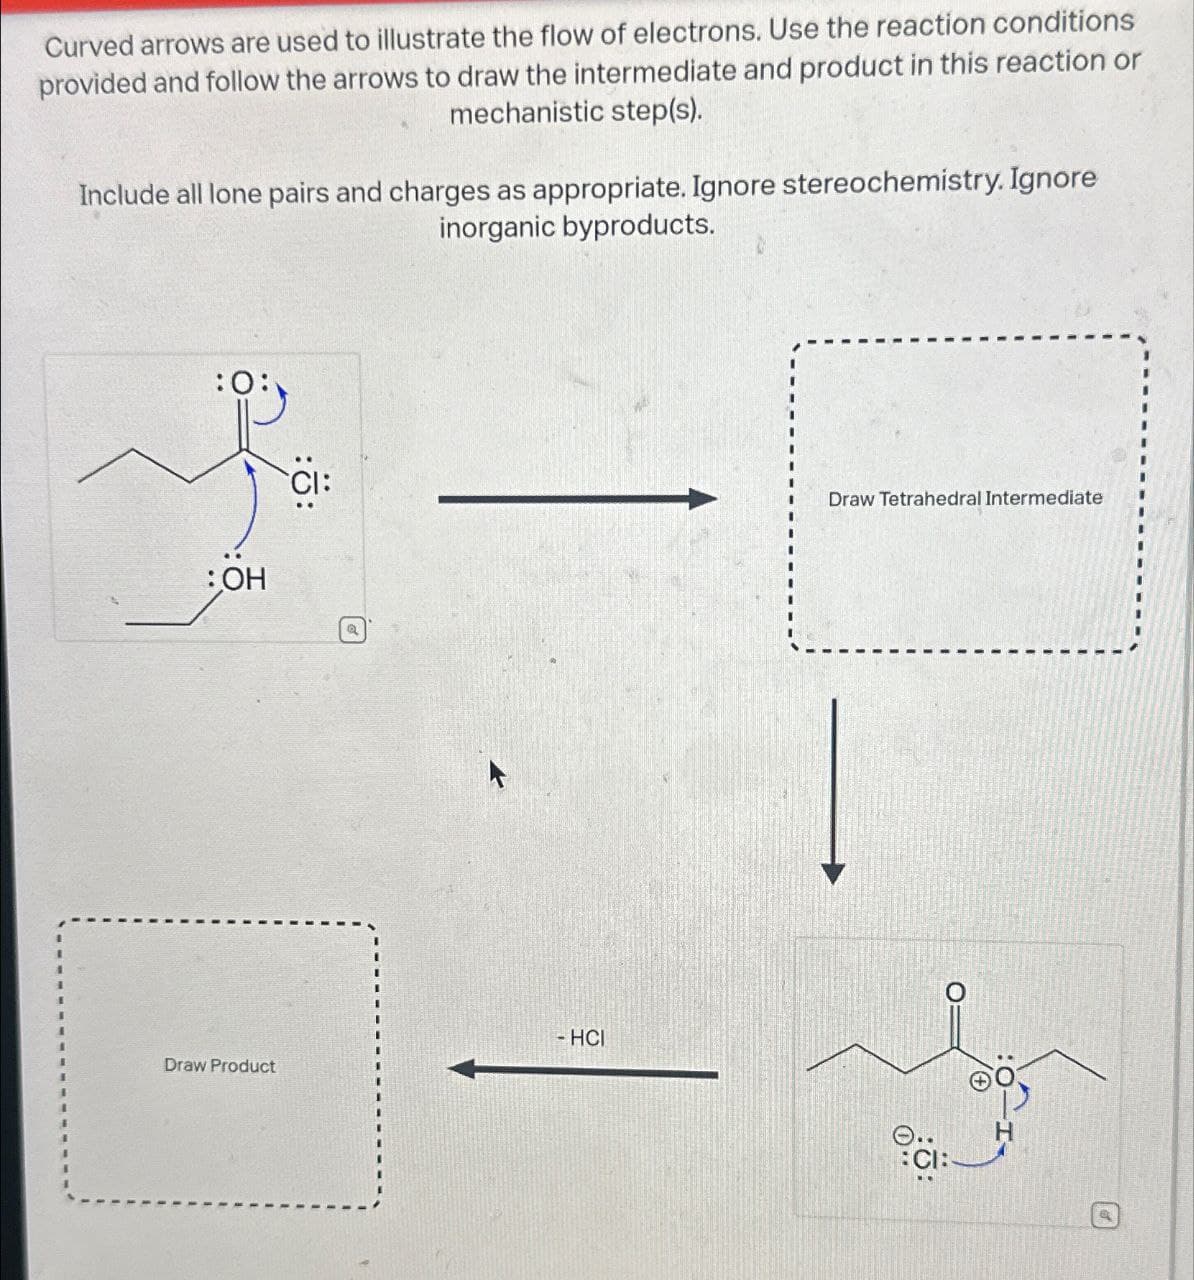 Curved arrows are used to illustrate the flow of electrons. Use the reaction conditions
provided and follow the arrows to draw the intermediate and product in this reaction or
mechanistic step(s).
Include all lone pairs and charges as appropriate. Ignore stereochemistry. Ignore
inorganic byproducts.
:OH
Draw Product
-HCI
Draw Tetrahedral Intermediate